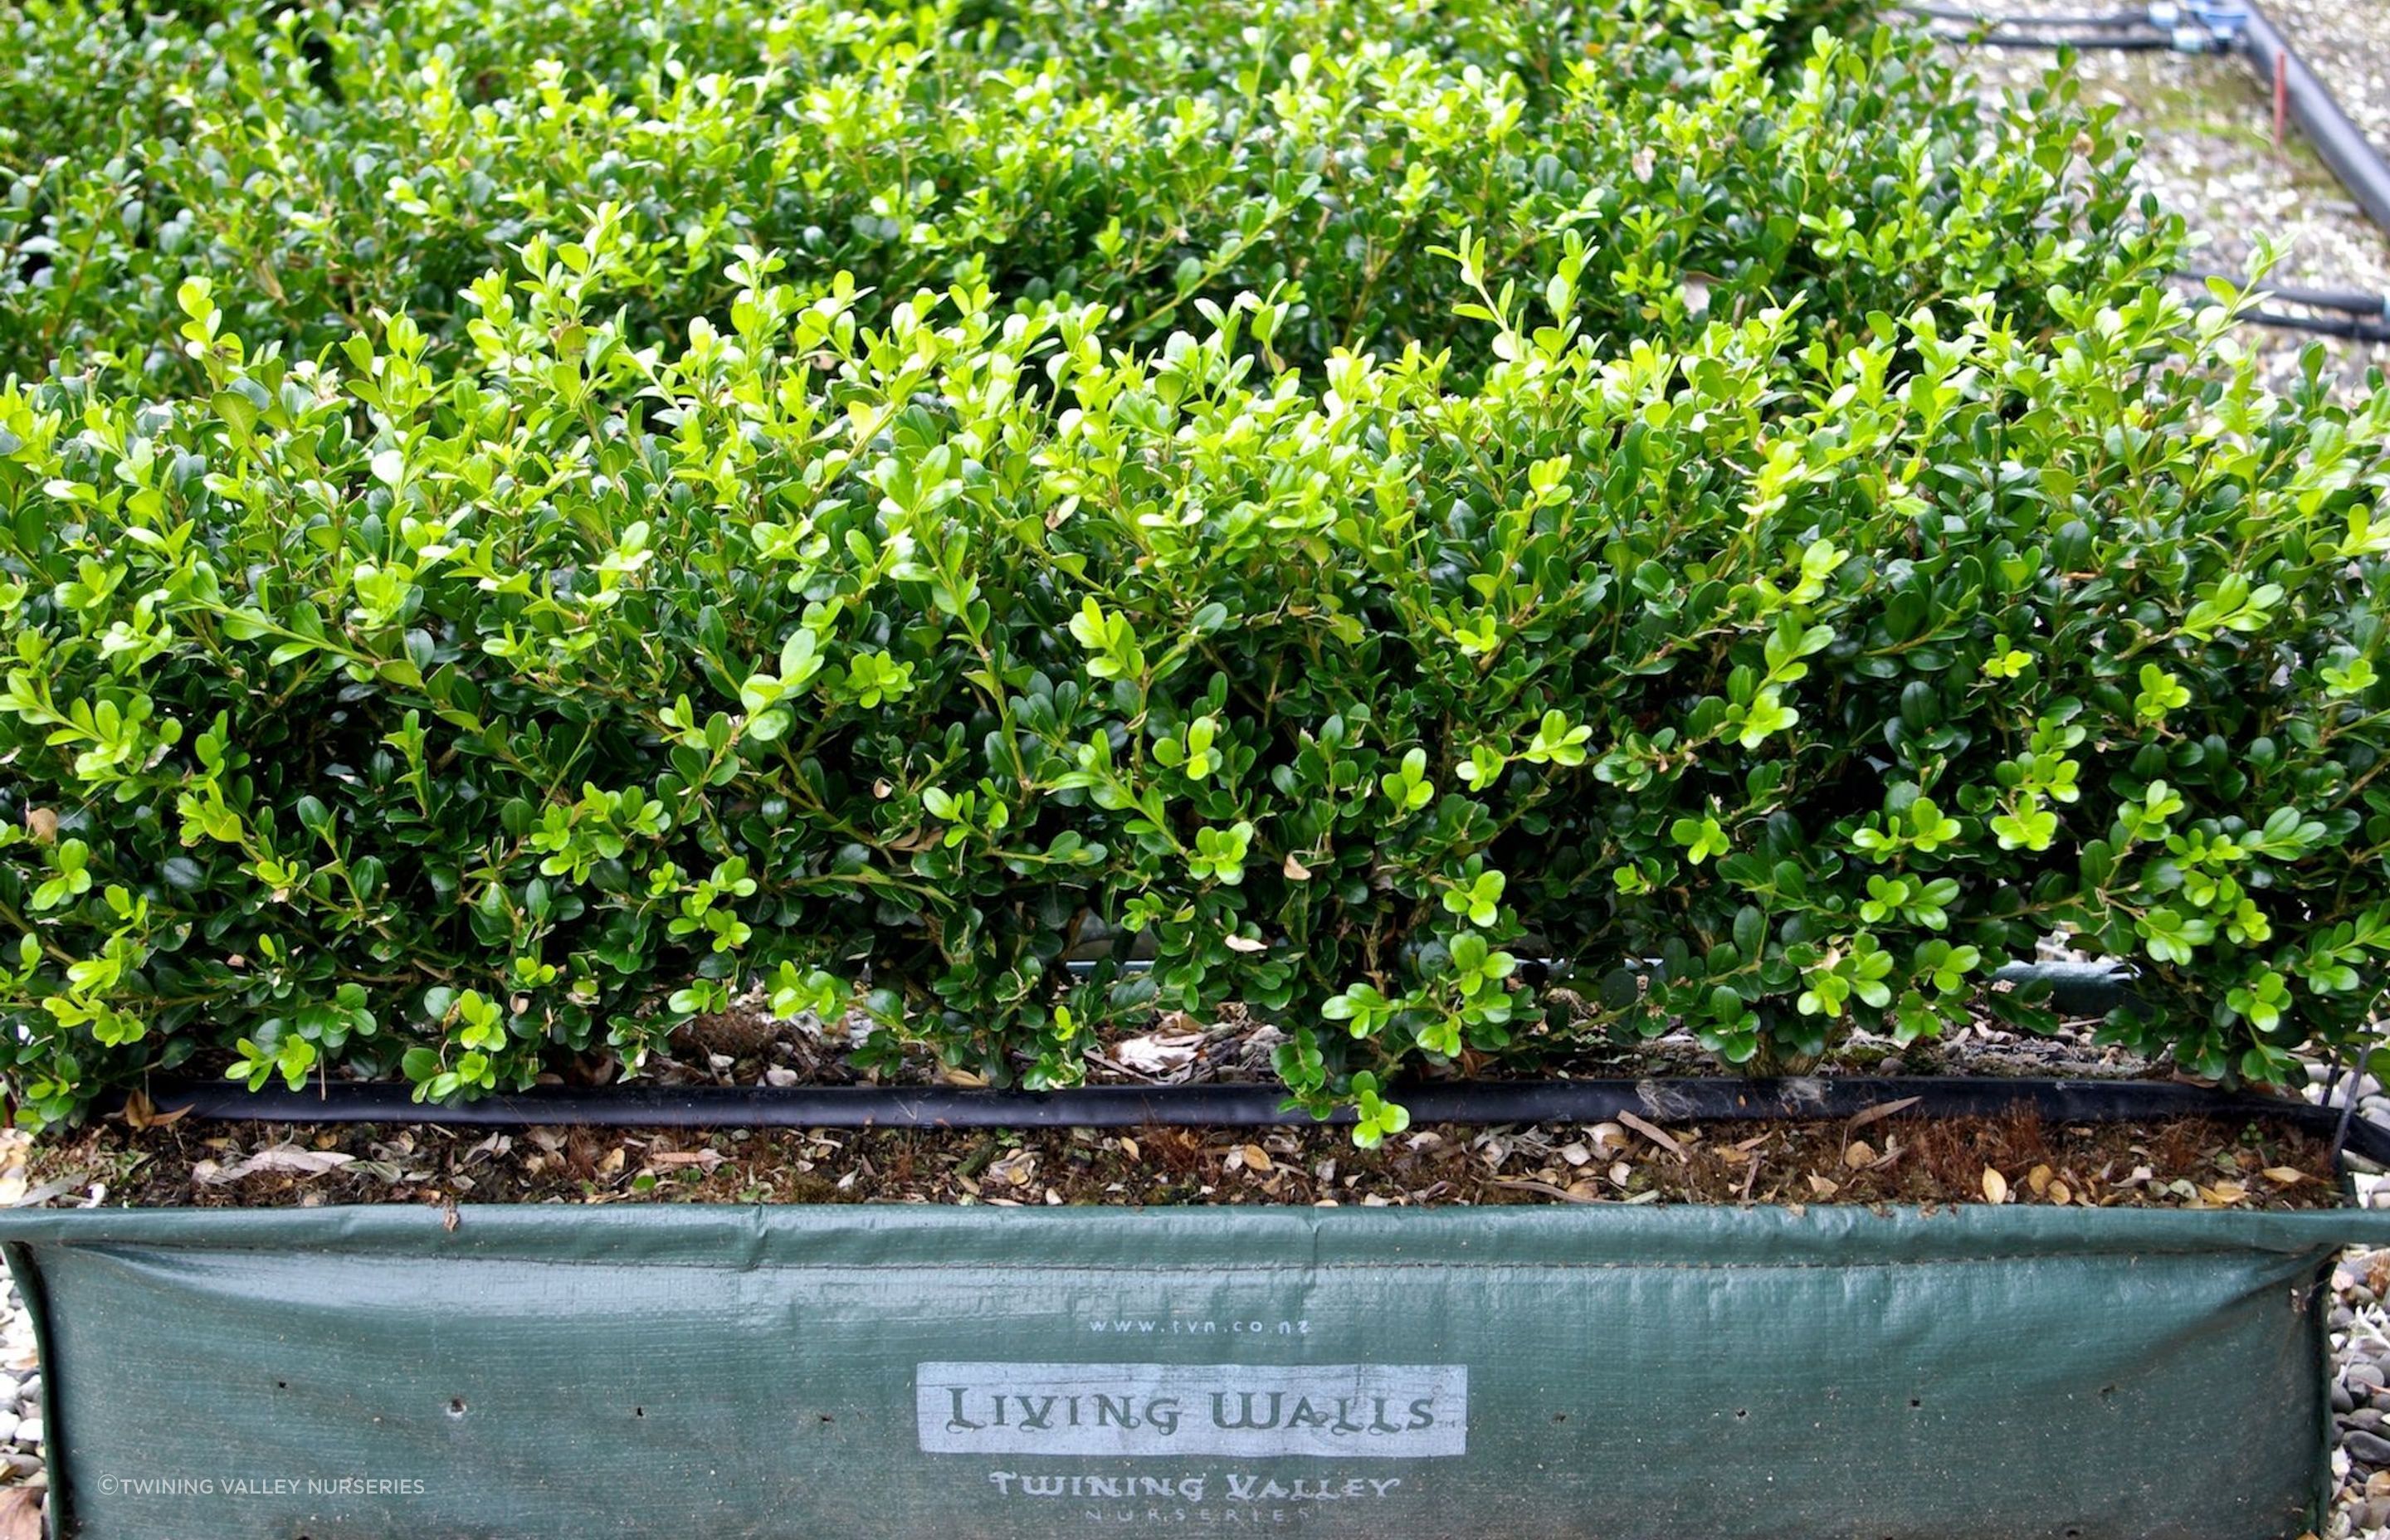 The Buxus hybrid 'Green Gem' makes an excellent low growing living wall that can be planted anywhere in New Zealand.